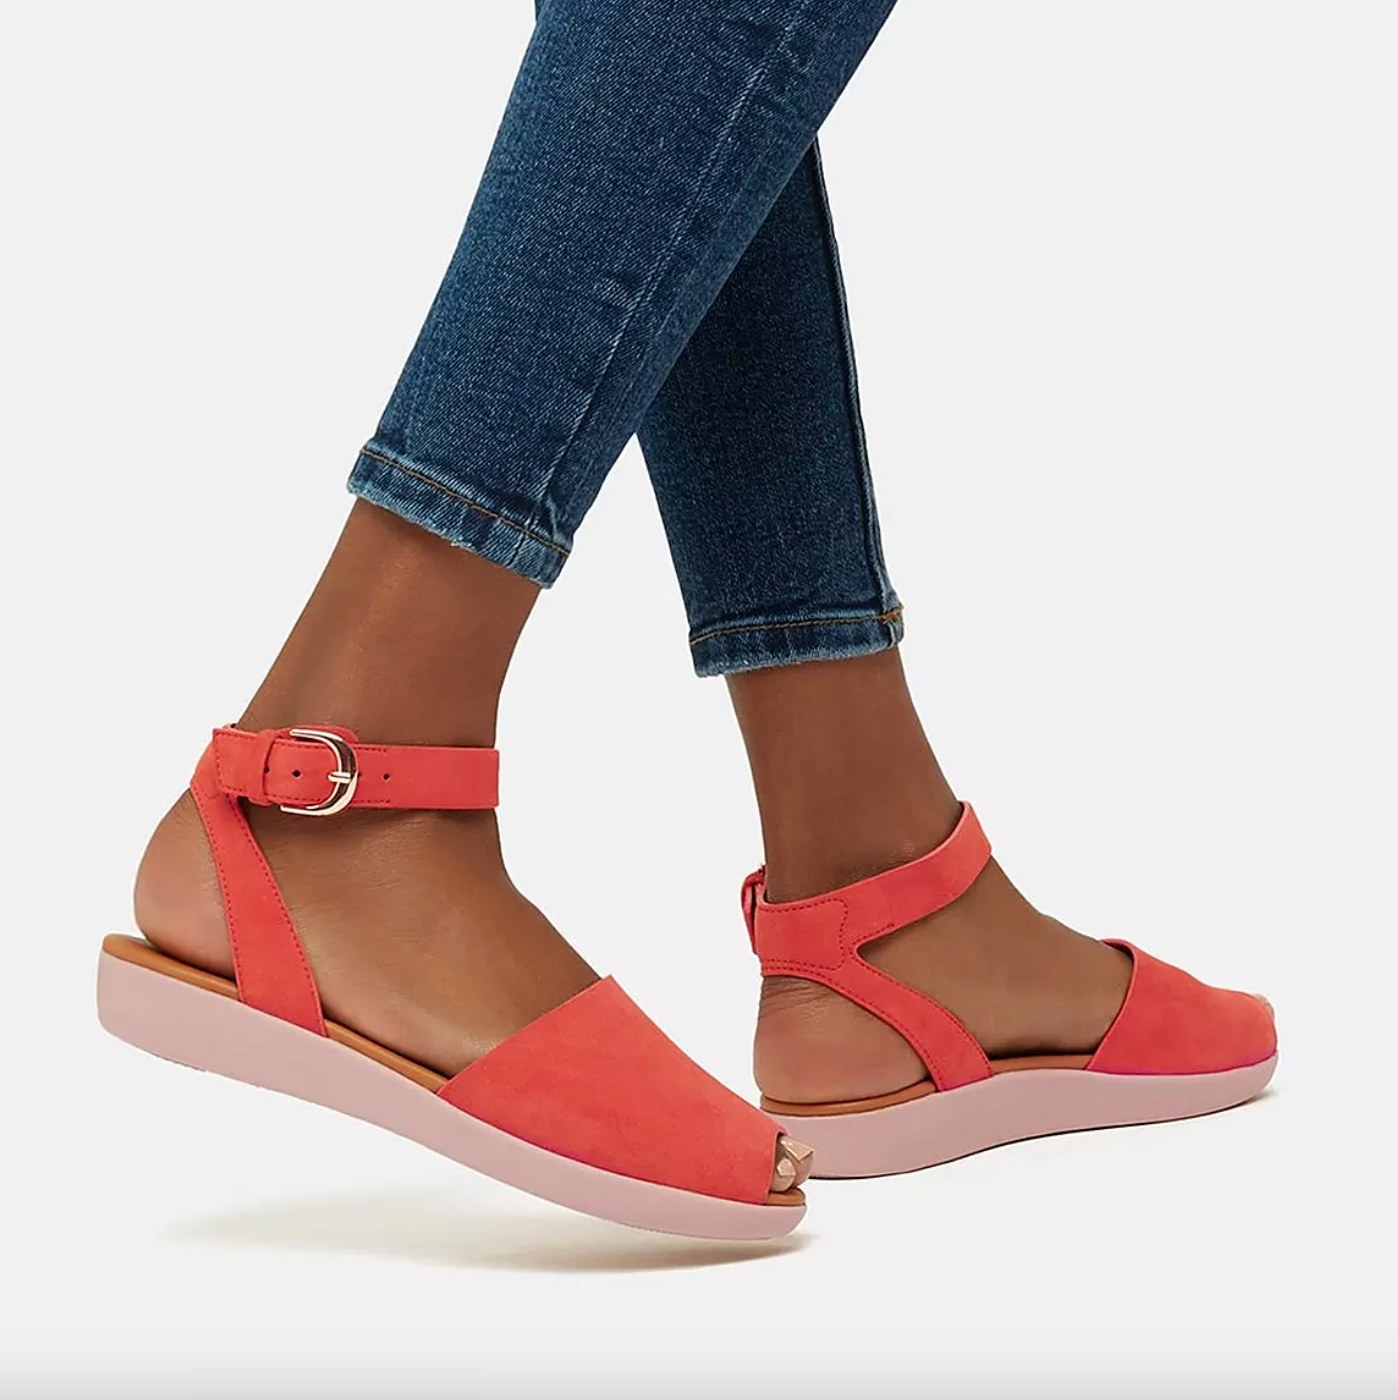 the suede peeptoe sandals in coral pink